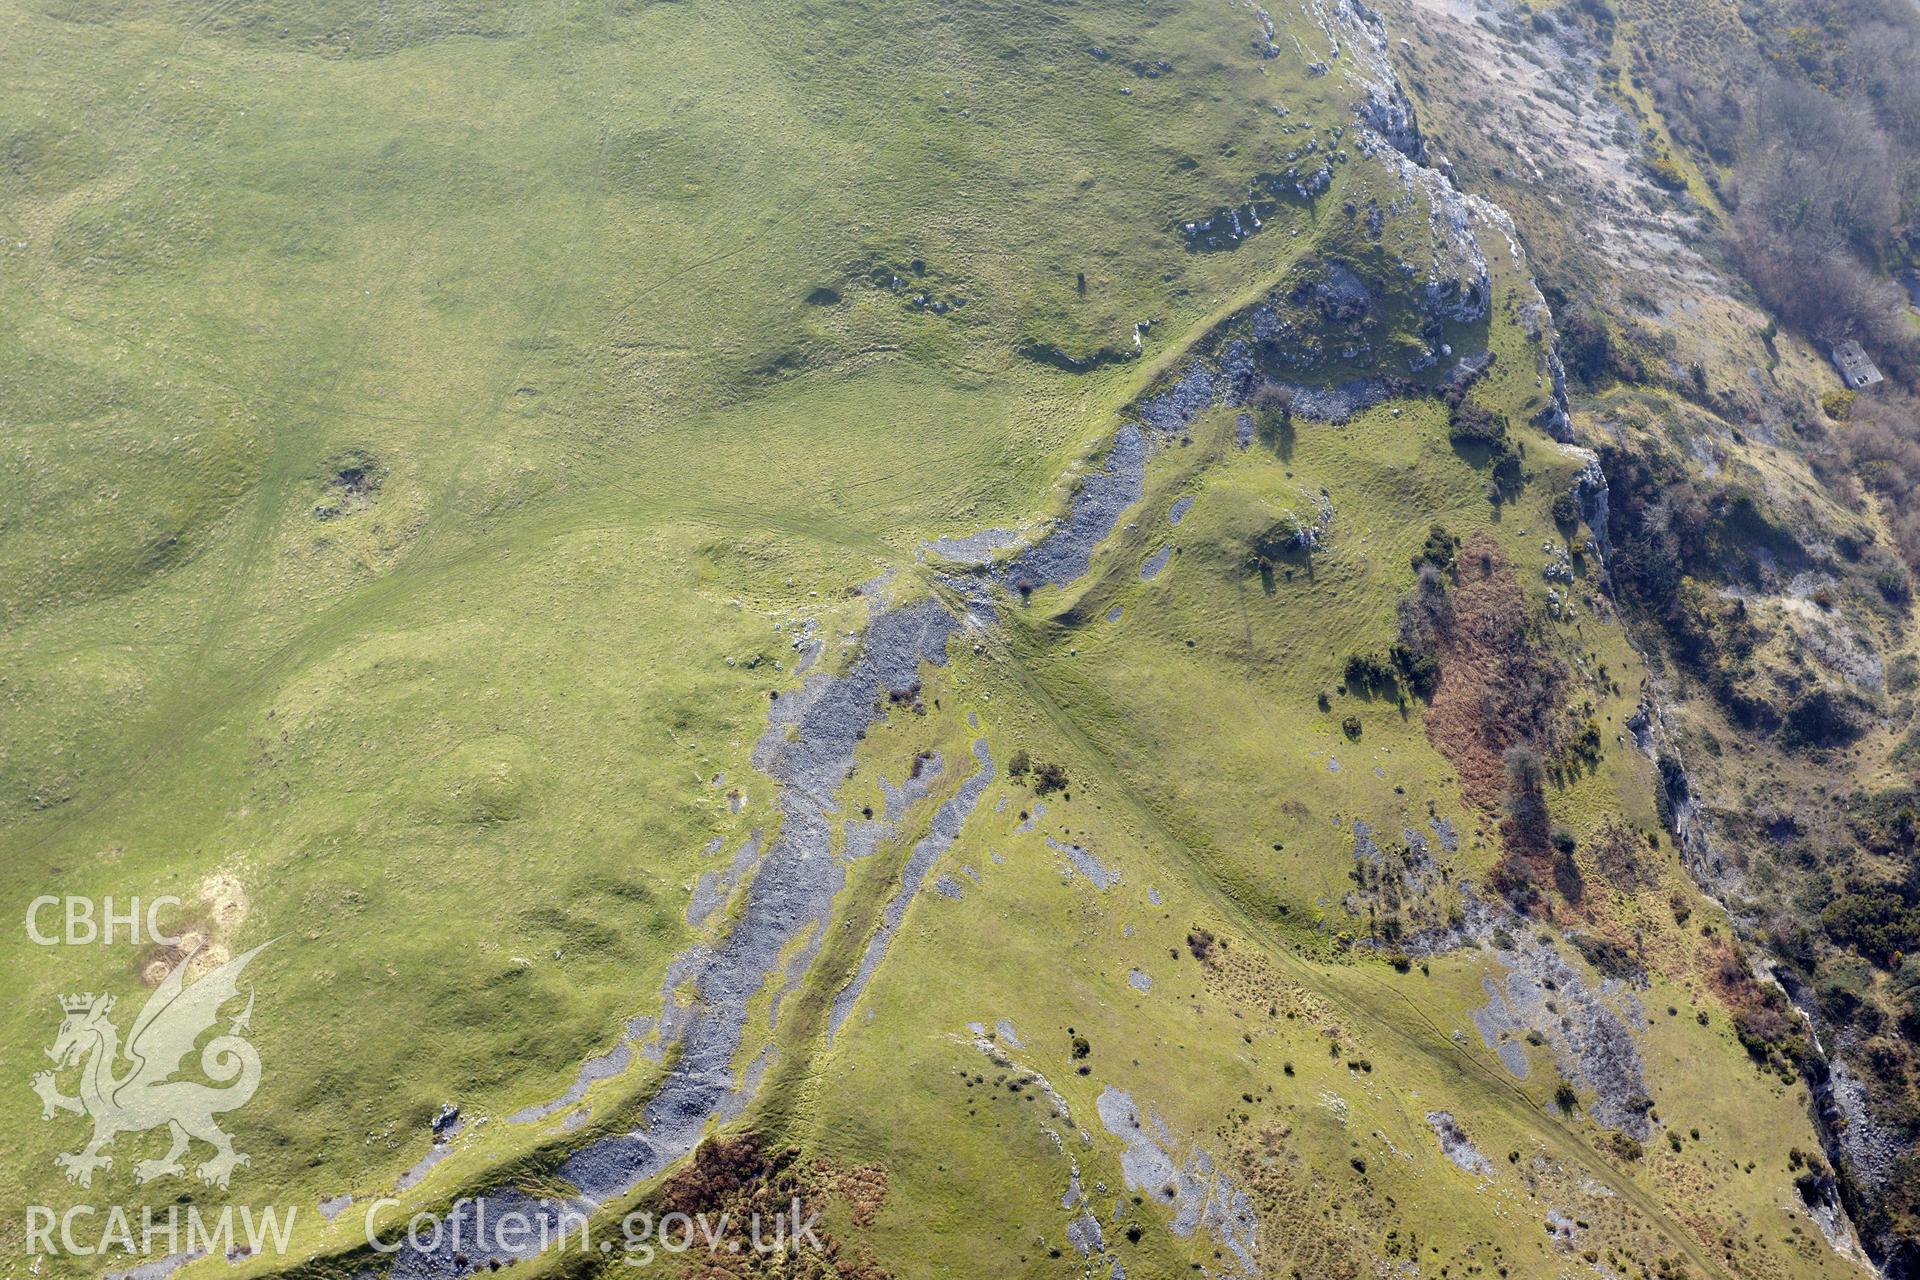 Pen-y-Corddyn-Mawr hillfort, Abergele. Oblique aerial photograph taken during the Royal Commission?s programme of archaeological aerial reconnaissance by Toby Driver on 28th February 2013.